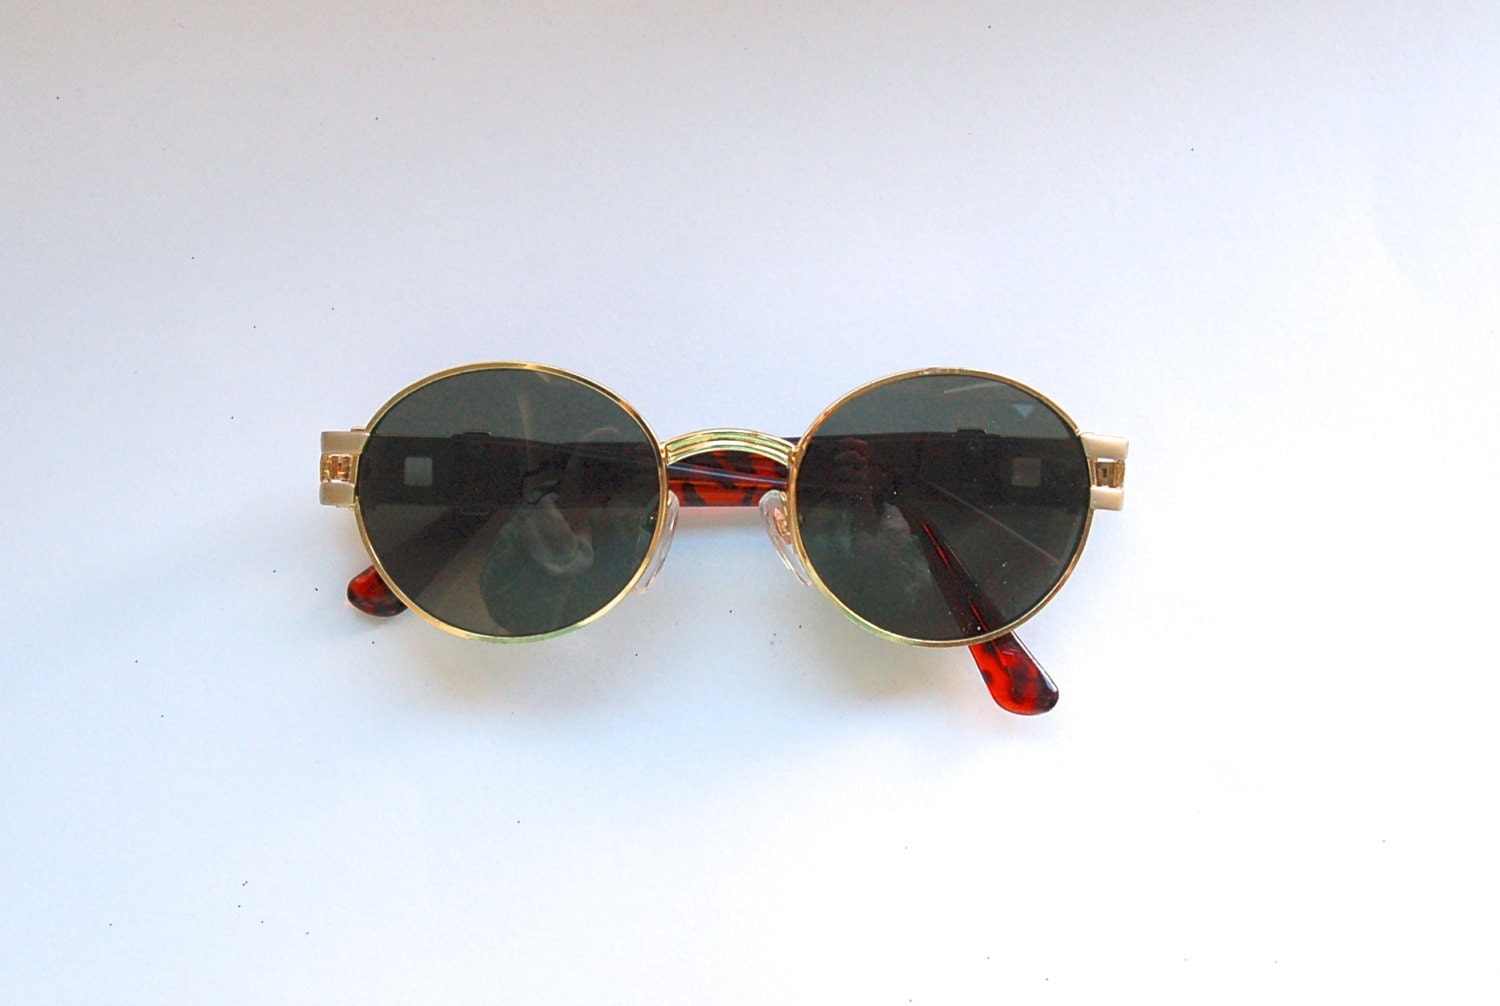 90s Vintage Circle Sunglasses Round Sunnies Gold Tone Frame With Tortoise Details Nos Dead 